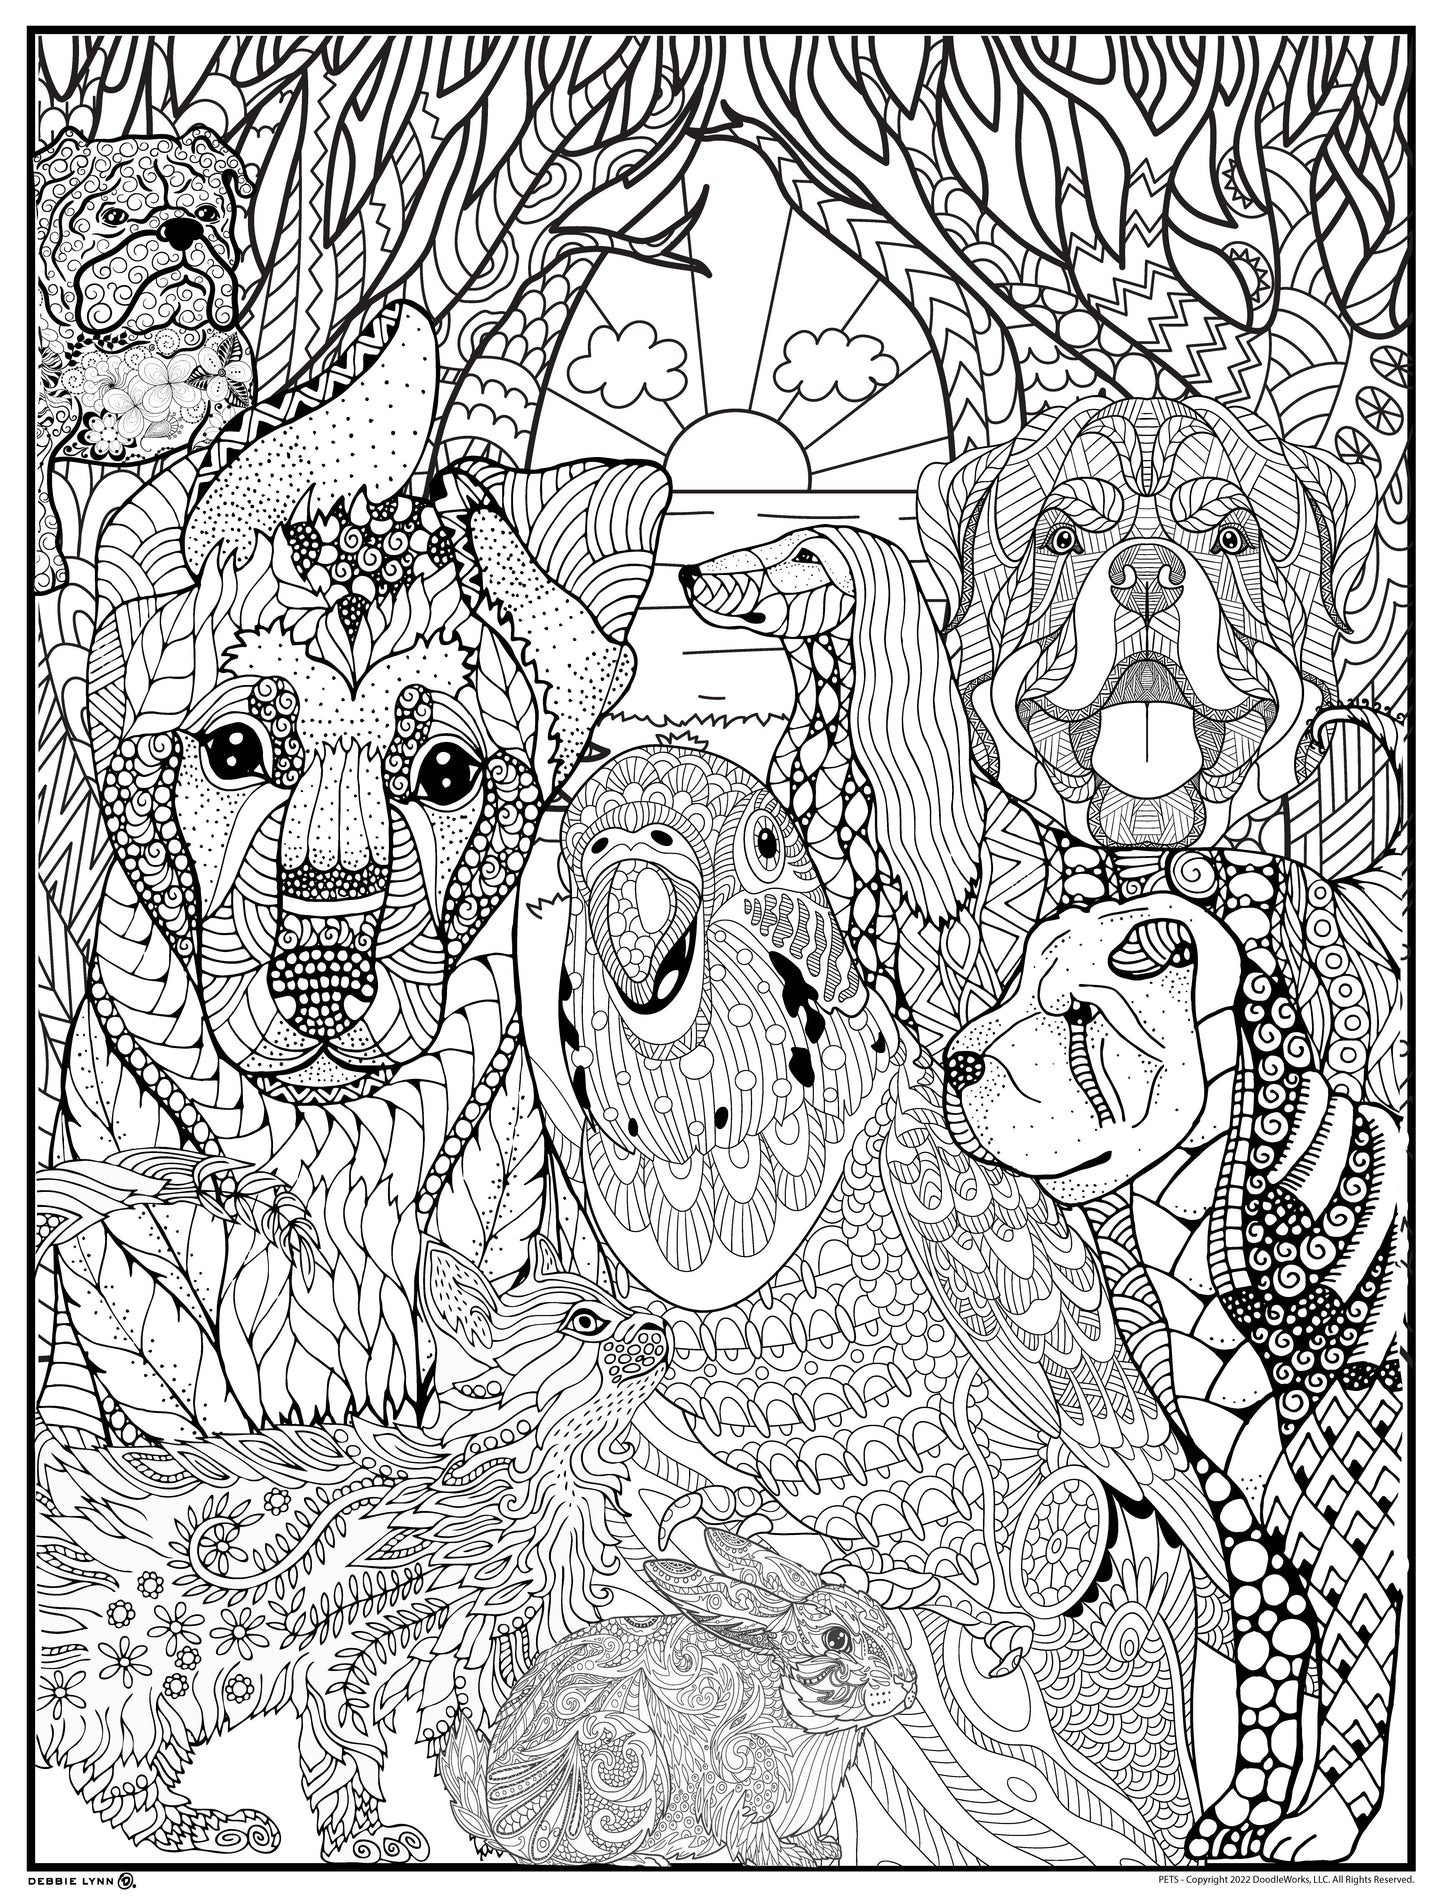 Pets Personalized Giant Coloring Poster 46"x60"